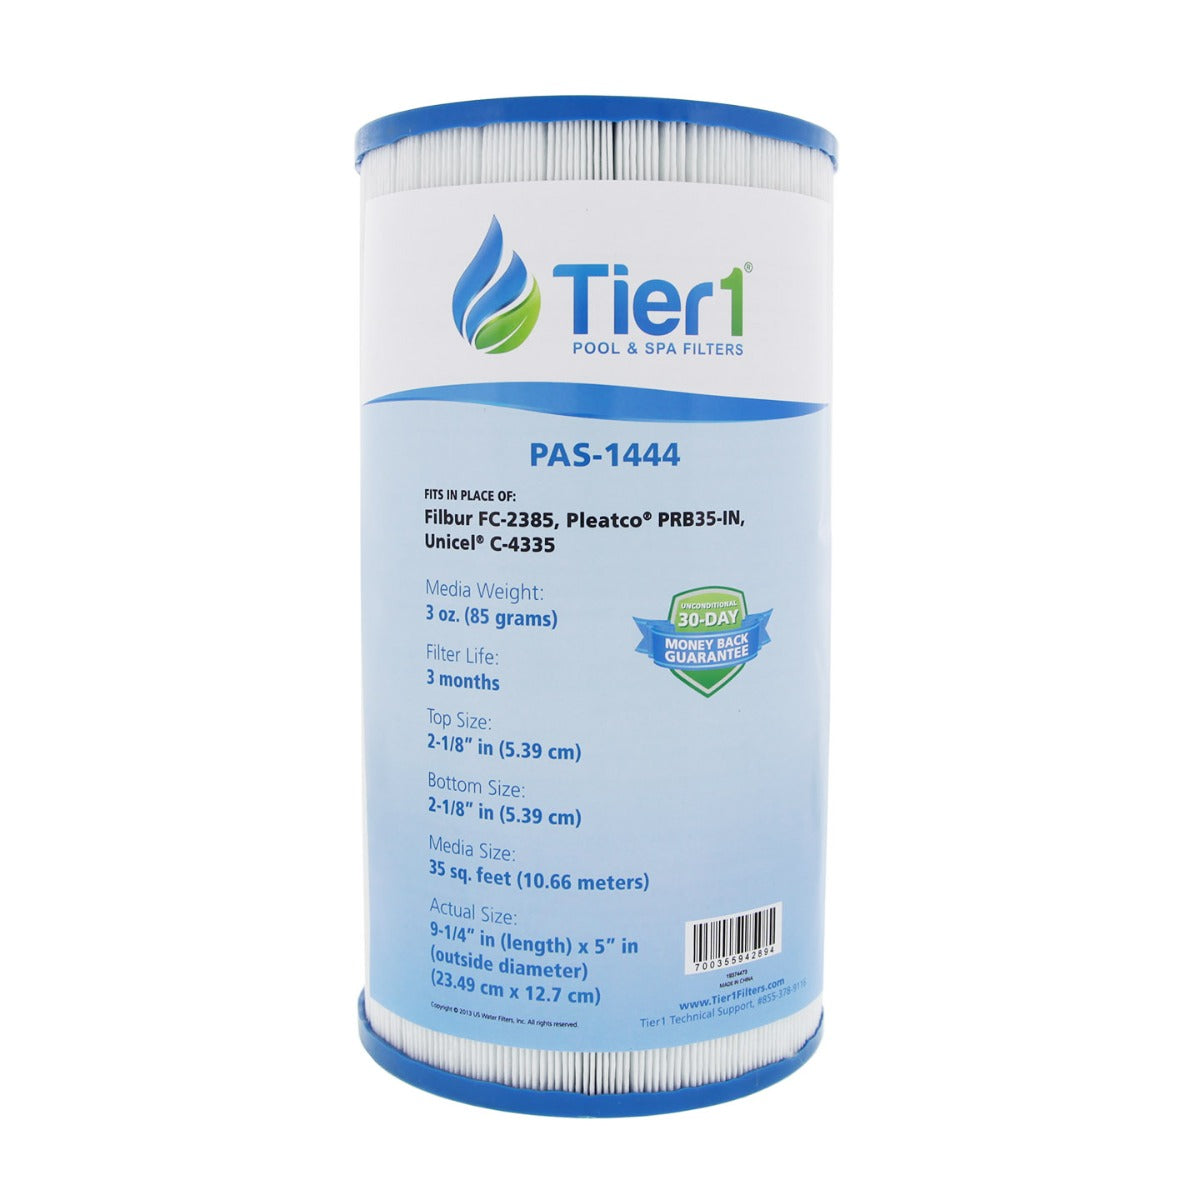 Tier1 Brand Replacement Filter for 03FIL1300, 17-2482, 25393, 303557, 817-3501, CCP269 &amp; R173431